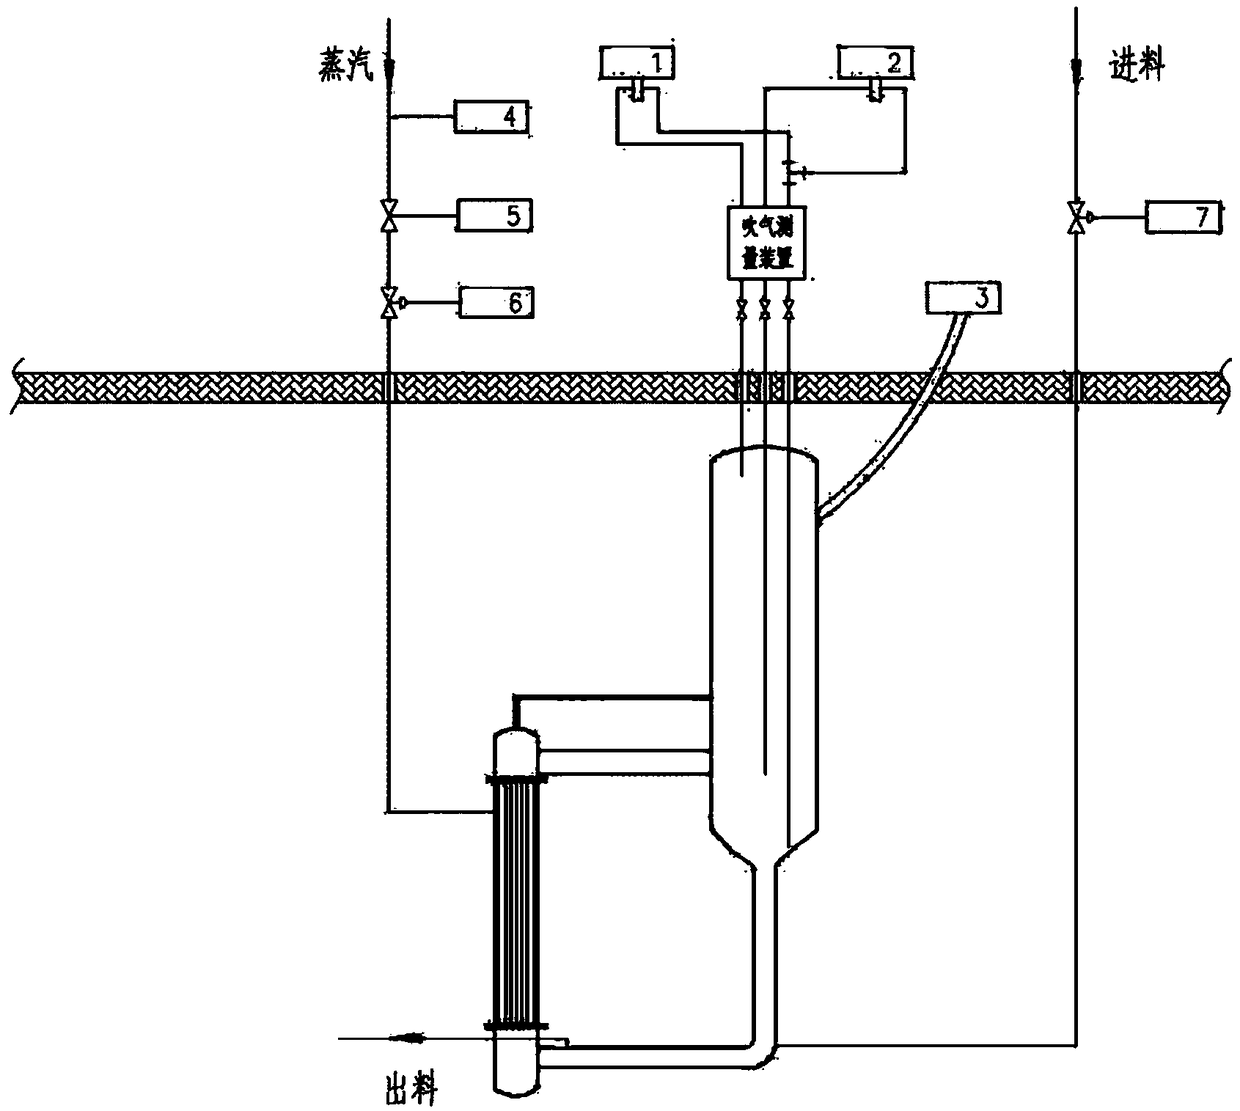 Novel evaporator process detecting and debugging system for nuclear fuel processing plant